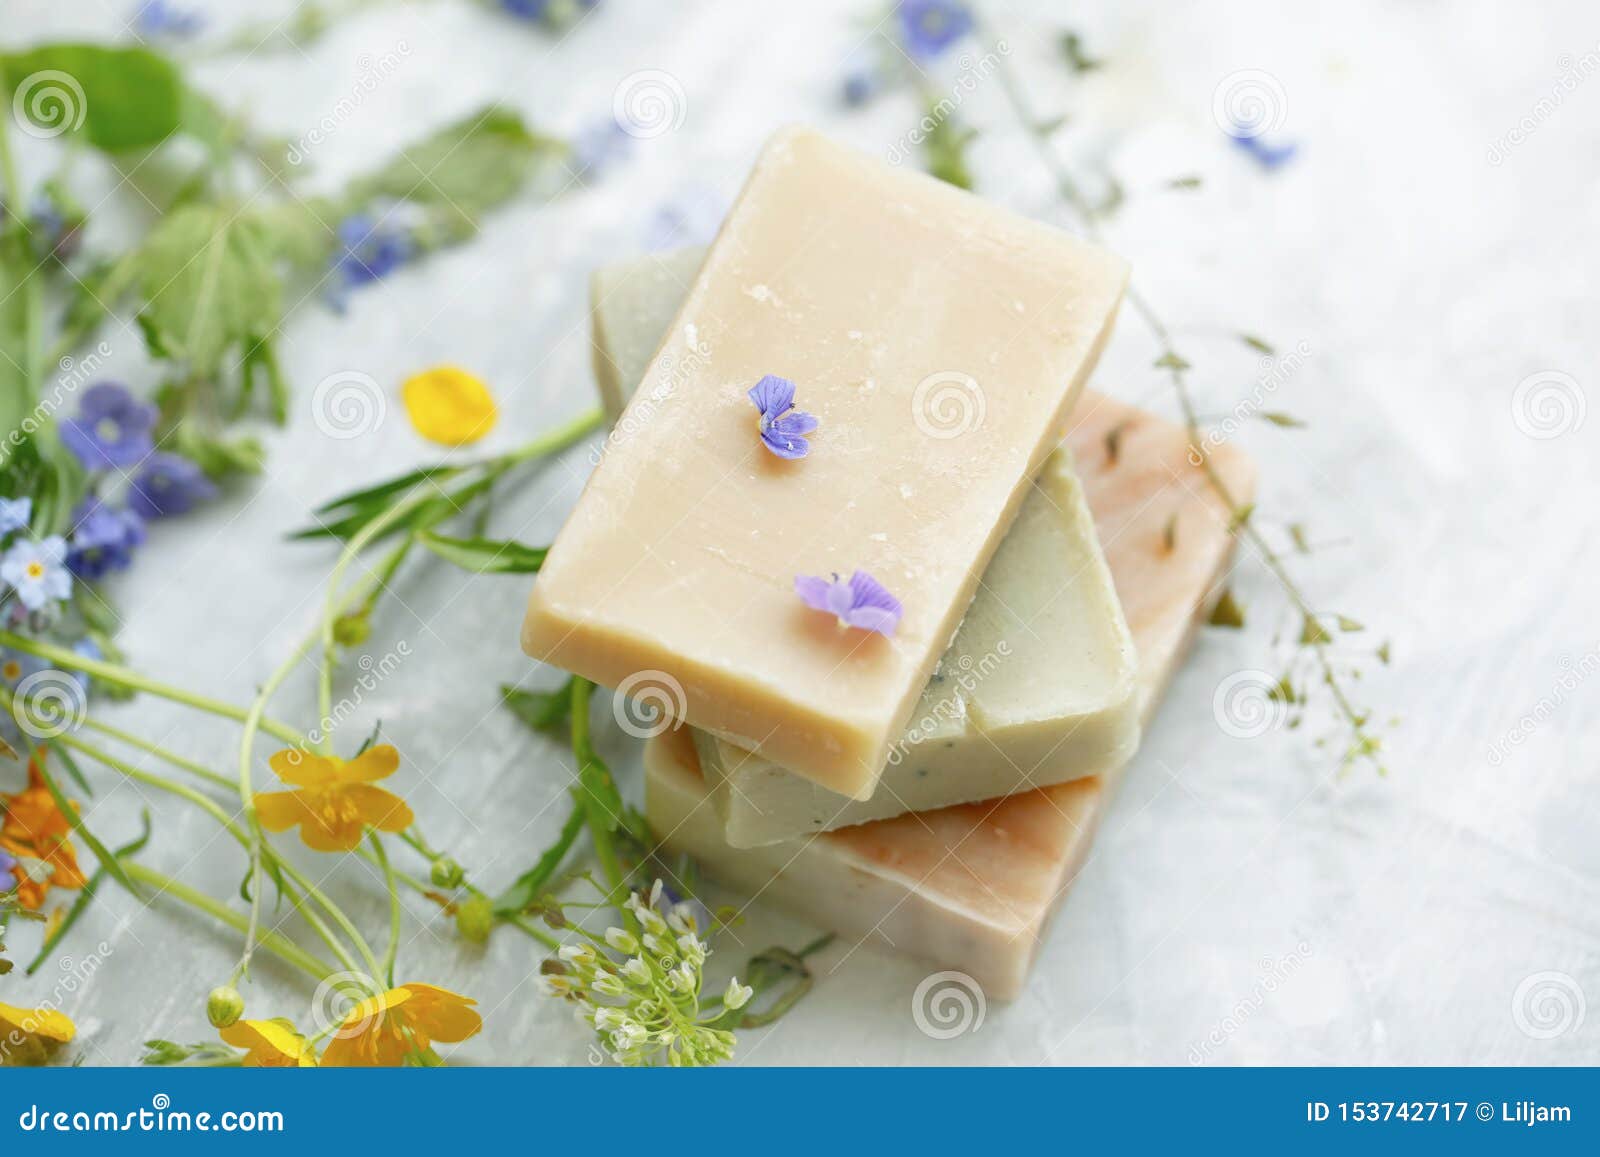 natural handmade soap bars with organic medicinal plants and flowers.homemade beauty products with natural essential oils from